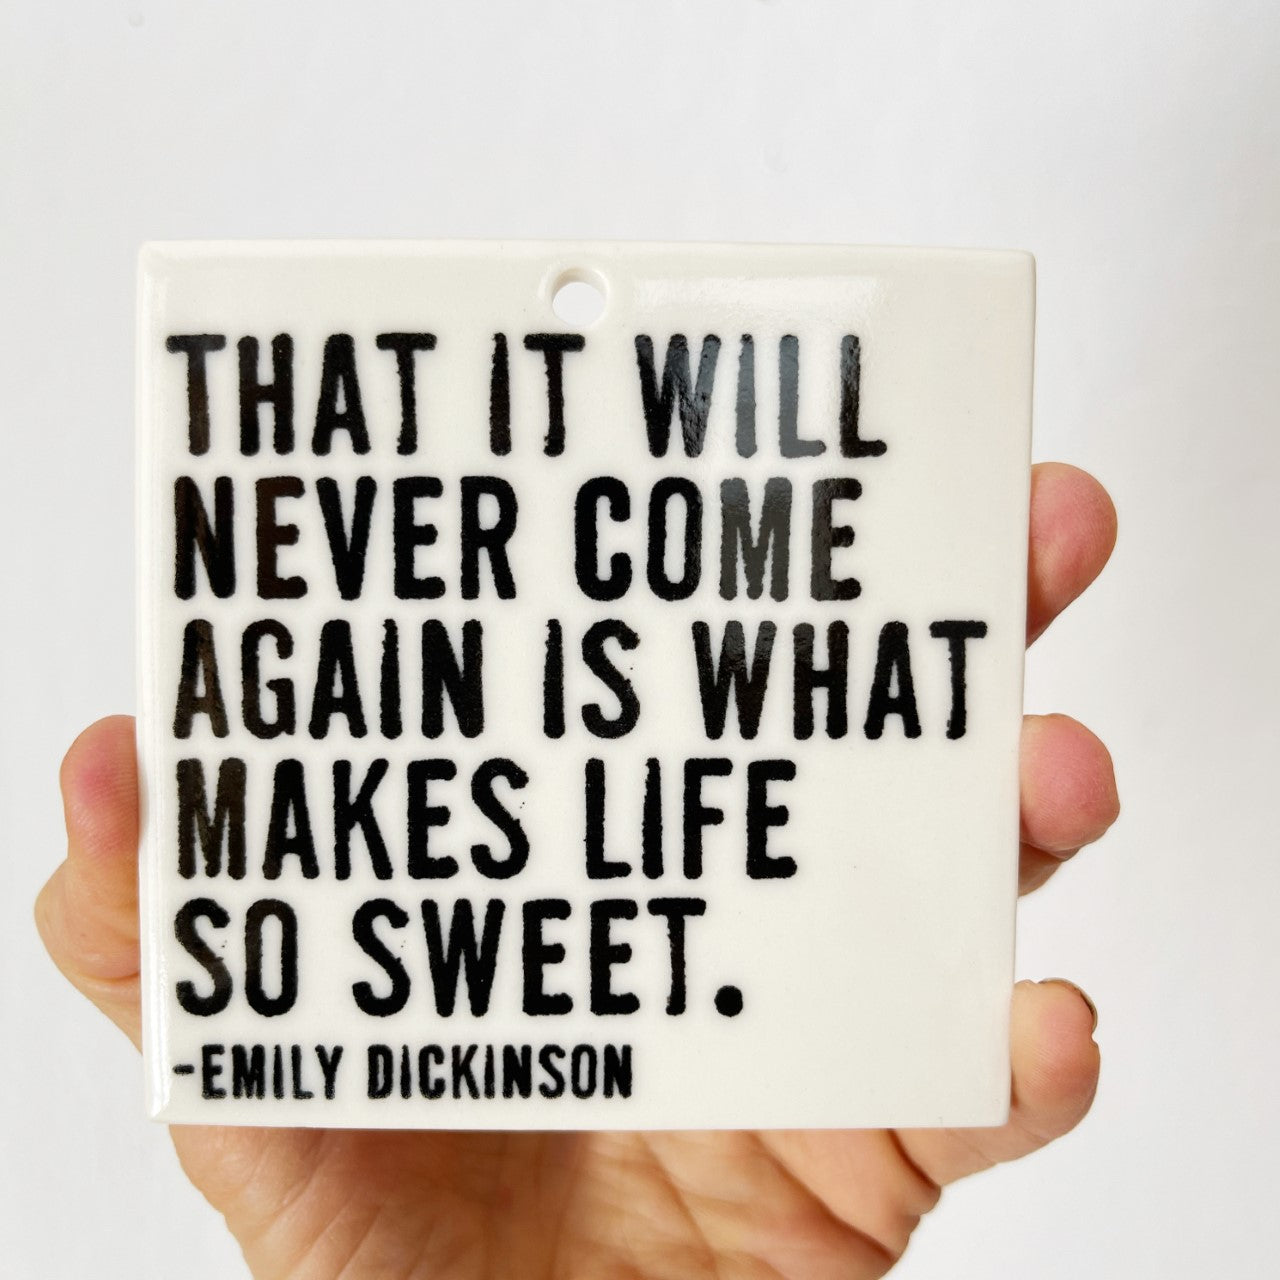 emily dickinson quote ceramic wall tile